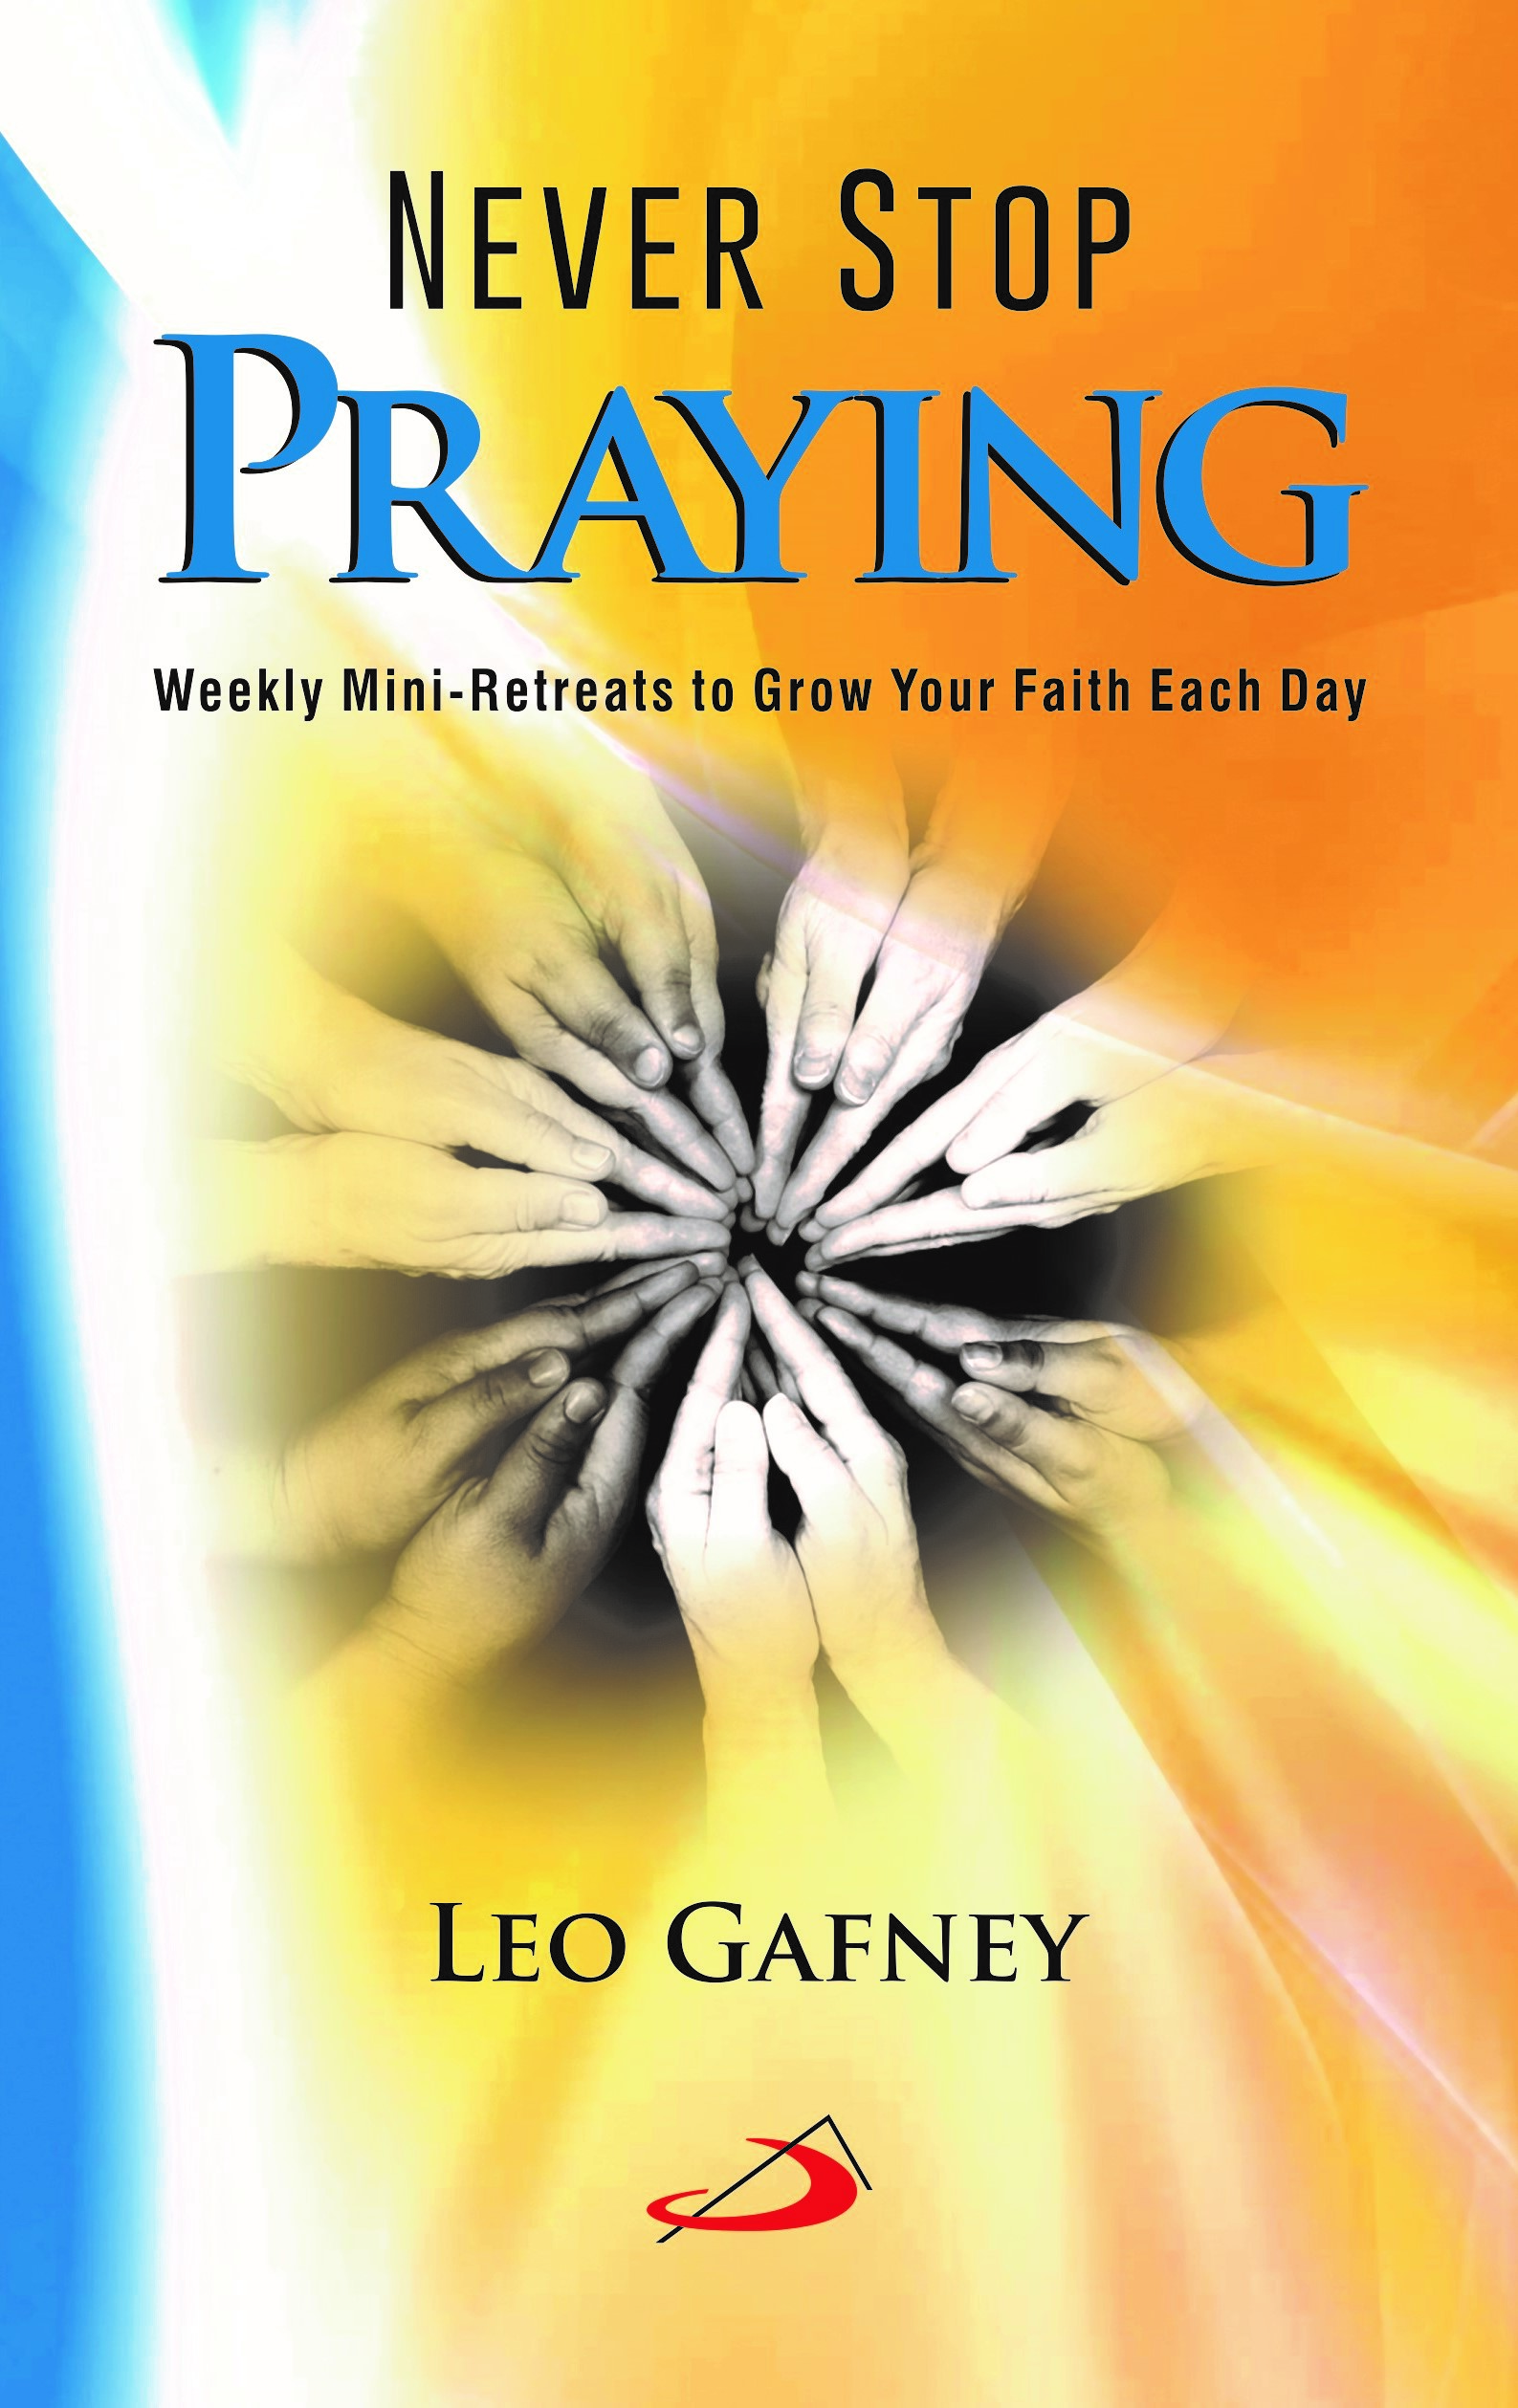 Never Stop Praying: Weekly Mini Retreats to Grow in Your Faith Each Day